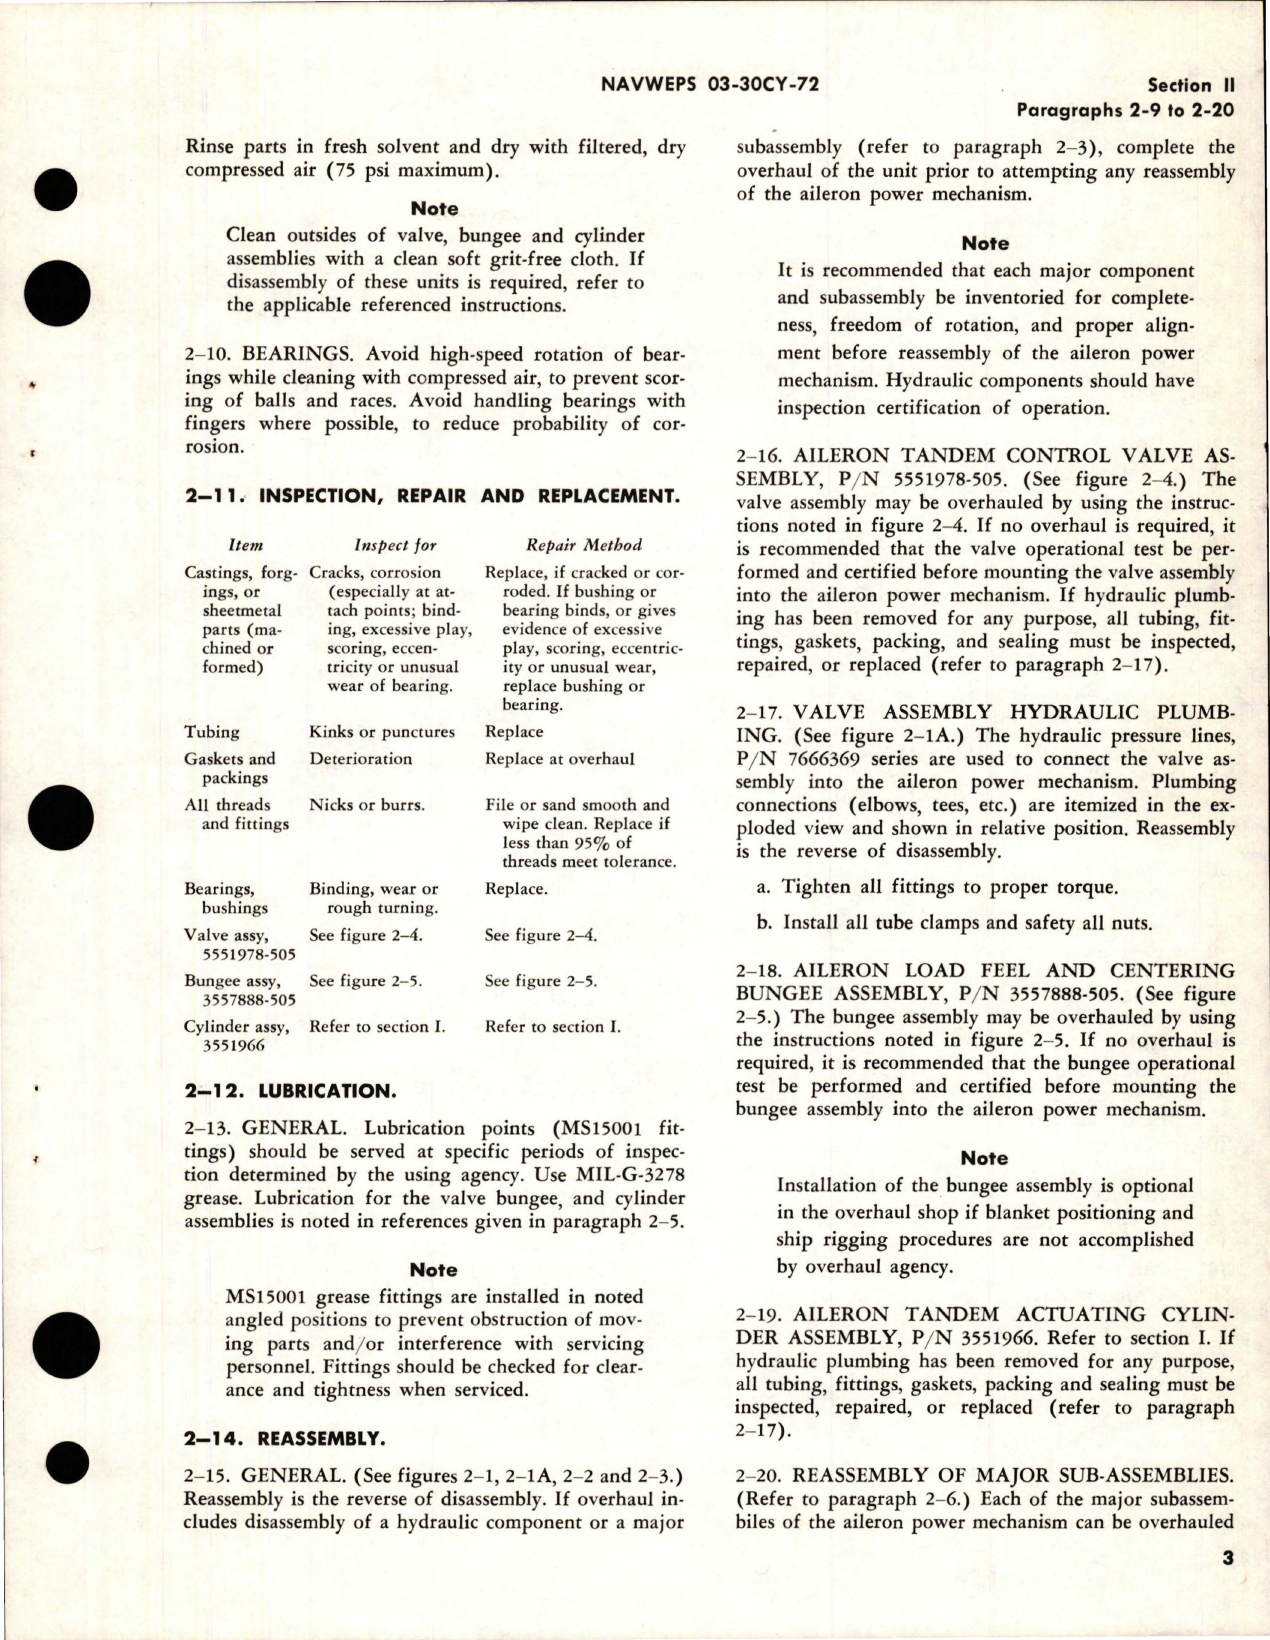 Sample page 7 from AirCorps Library document: Overhaul Instructions for Aileron Power Mechanism 